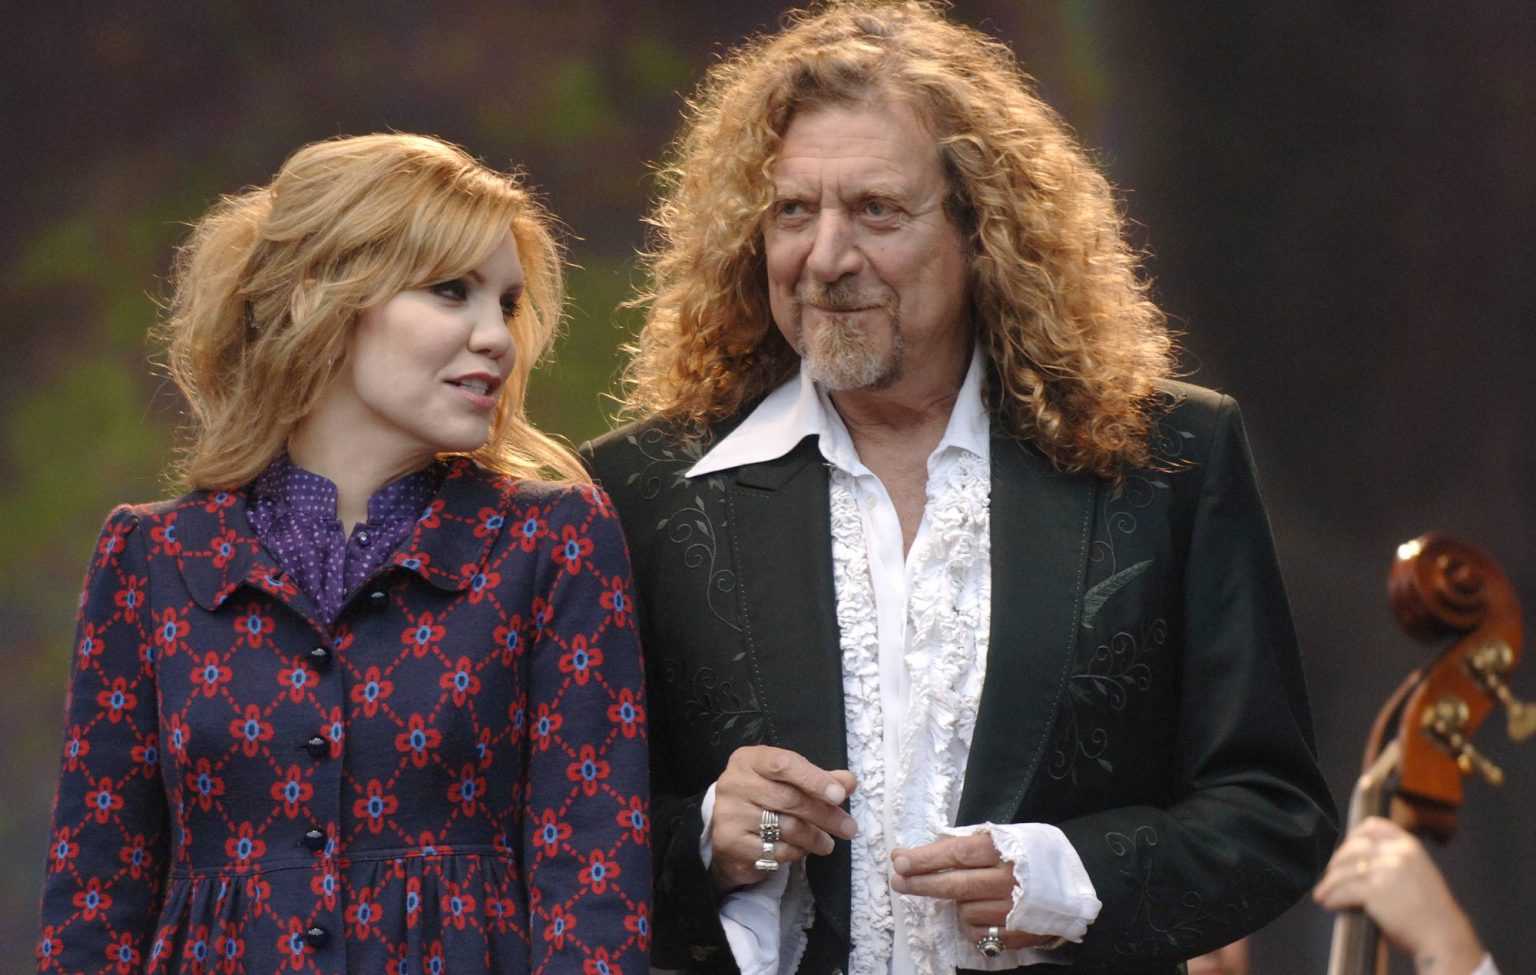 Robert Plant & Alison Krauss are touring in 2023